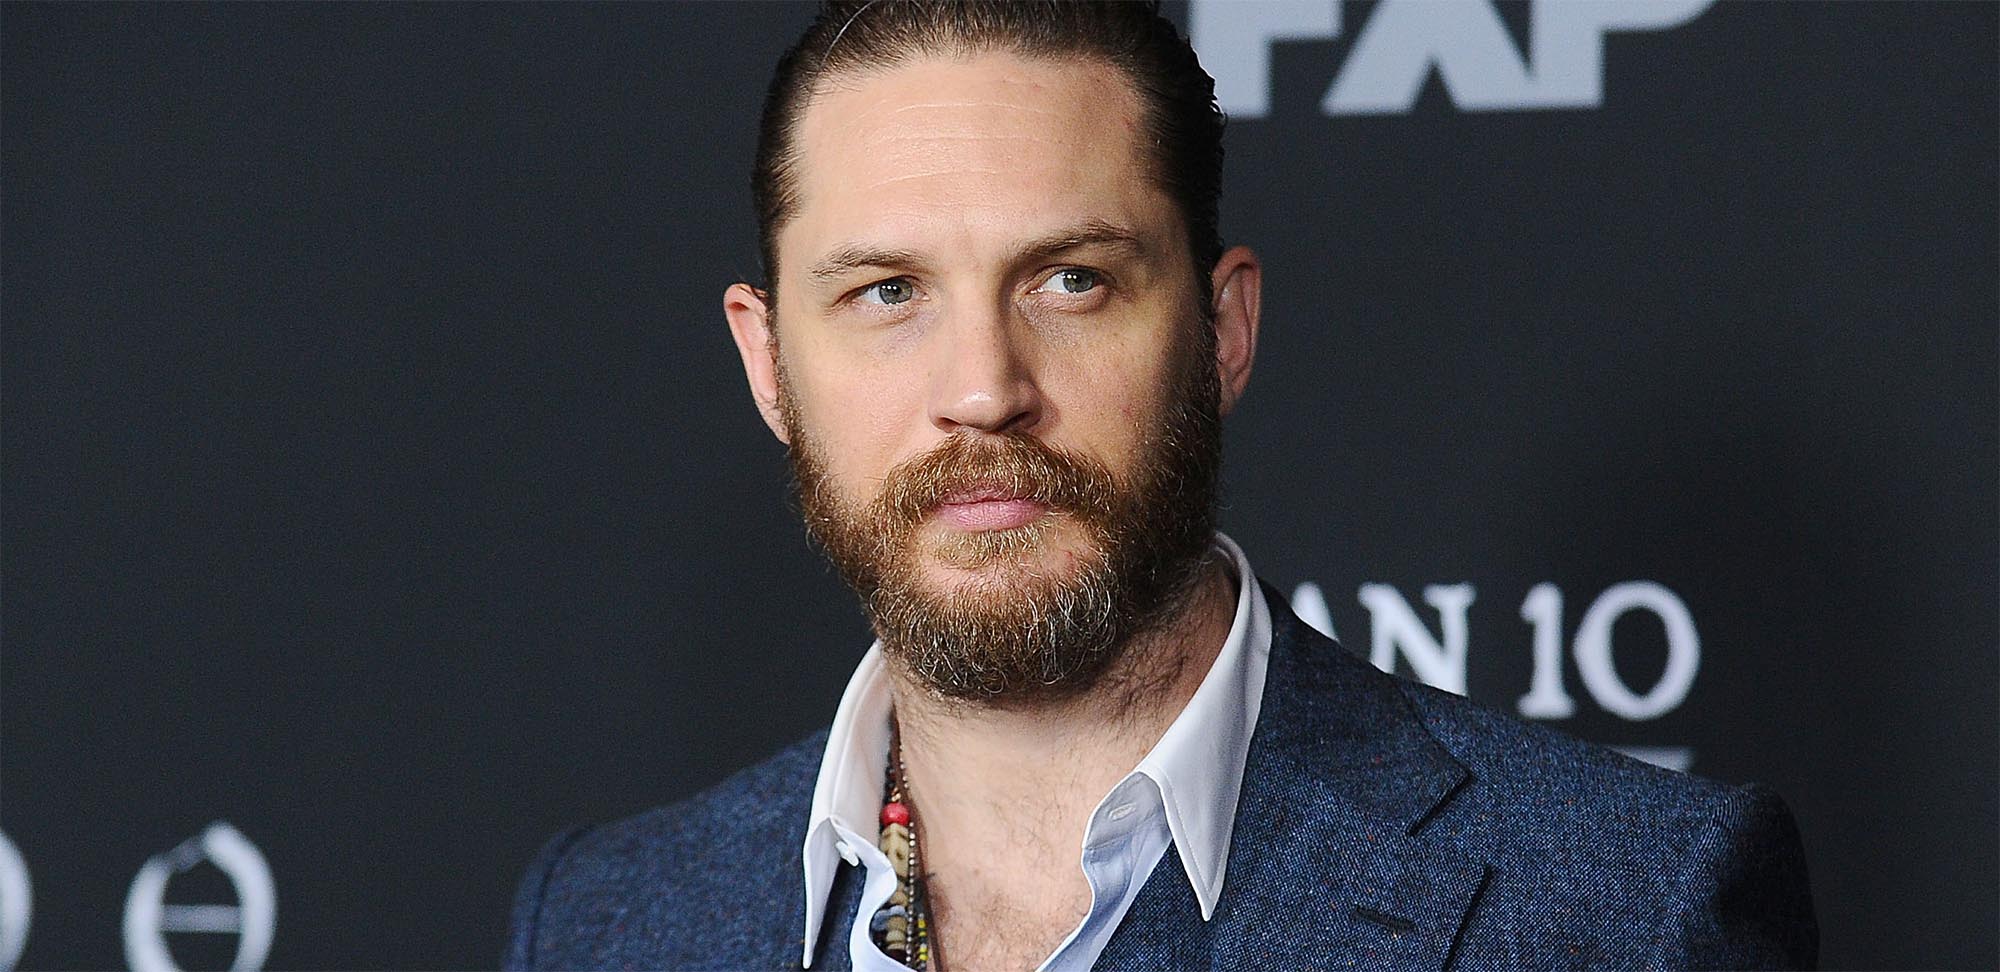 Playing an everyday guy with an inner monster is something Tom Hardy does extremely well. Check out our ranking of his 14 craziest performances ever.